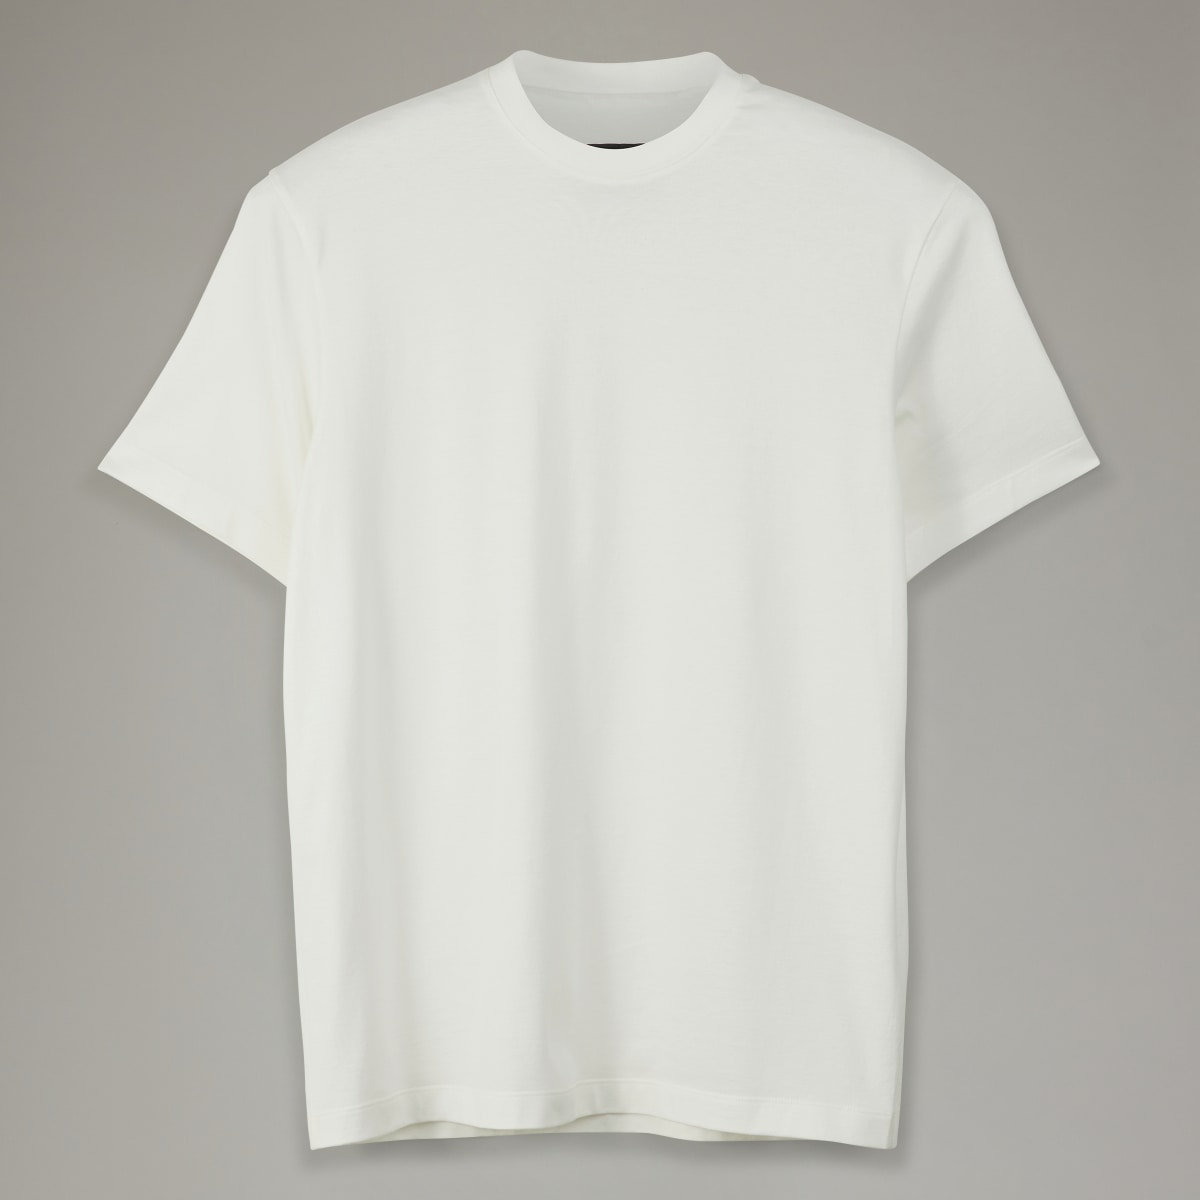 Adidas Y-3 Relaxed T-Shirt. 5